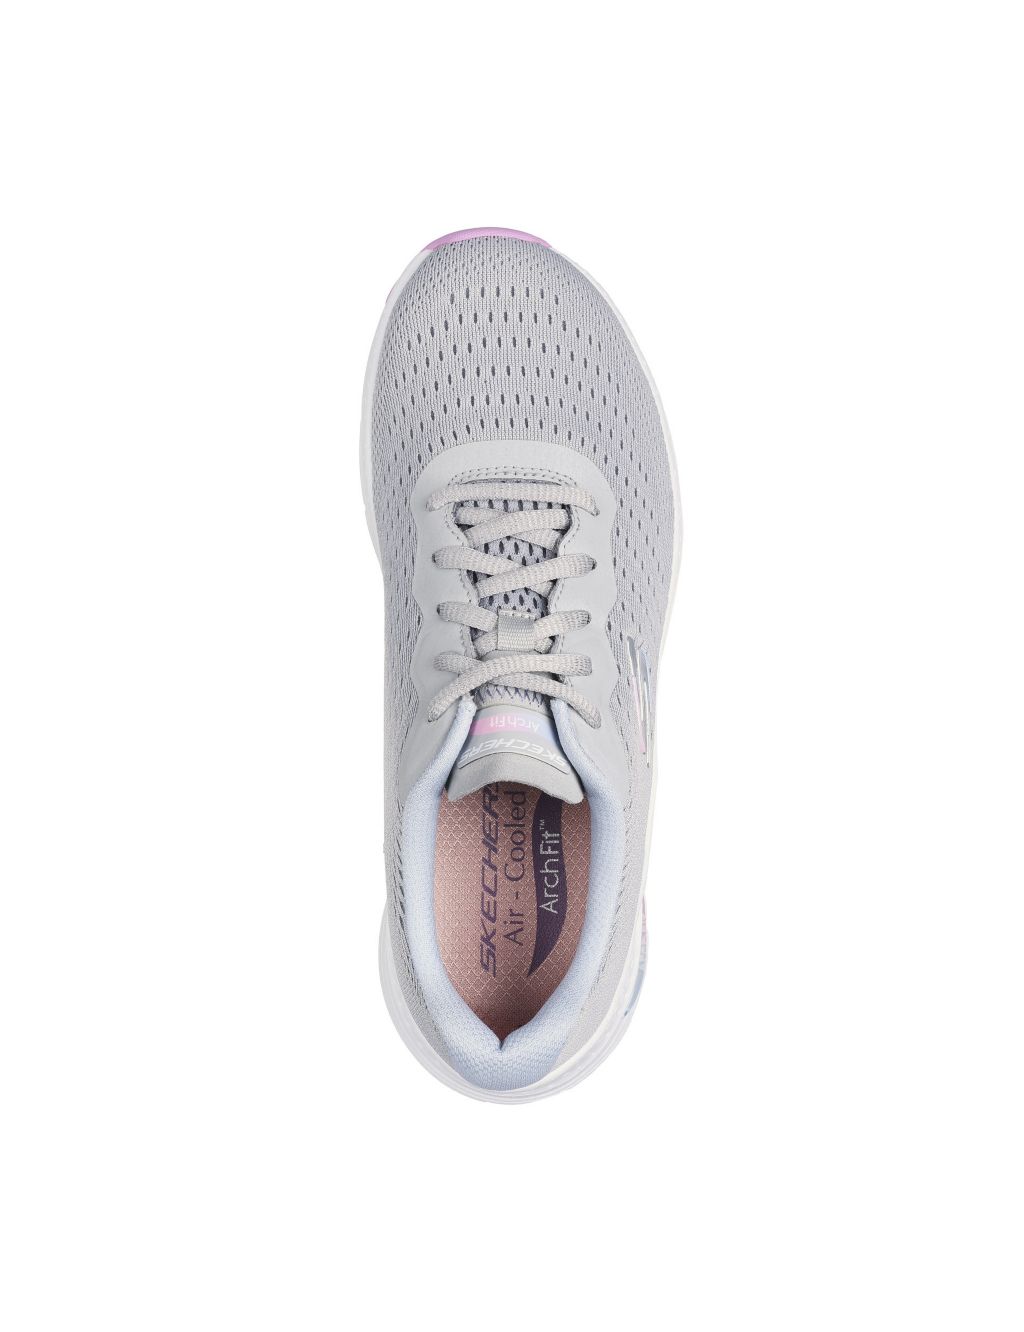 Arch Fit™ Infinity Lace Up Mesh Trainers image 3